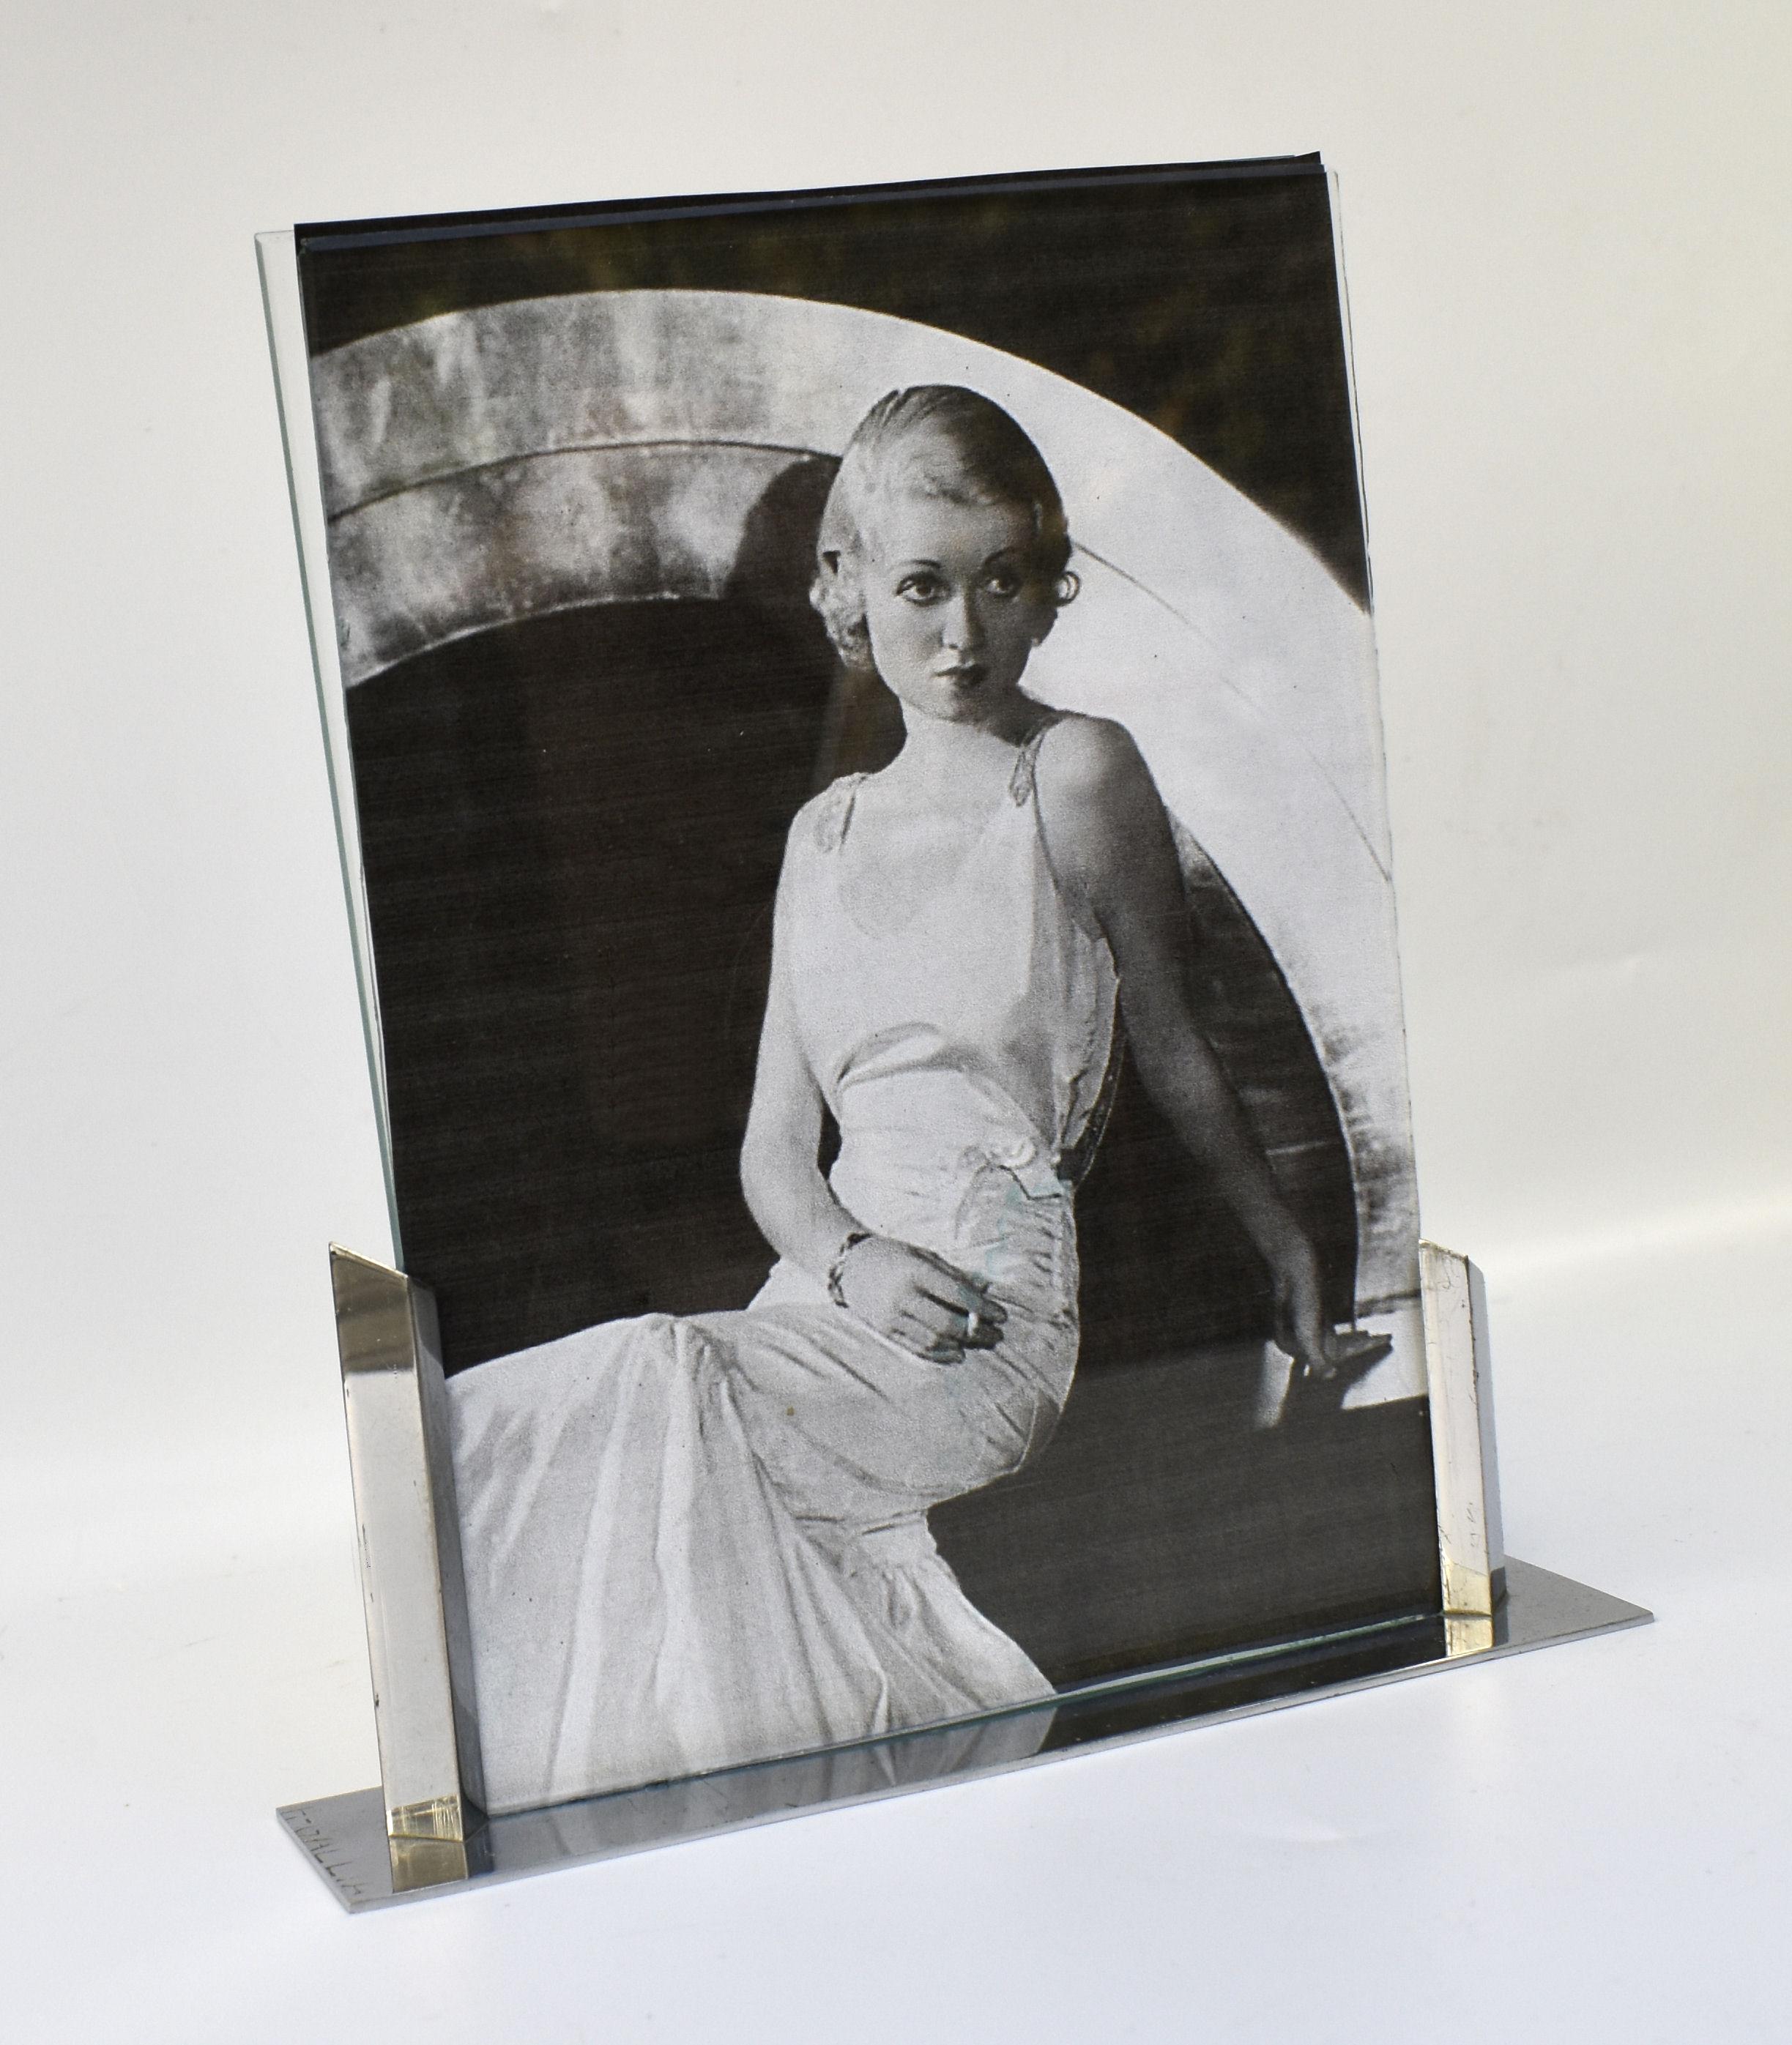 Super stylish 1930's Art Deco Modernist picture frame in chrome and glass. Signed to the base f. Gallia, The frame has two pieces of glass which slot into the chrome Stand allows an image to be displayed both sides of the free standing frame. Ideal